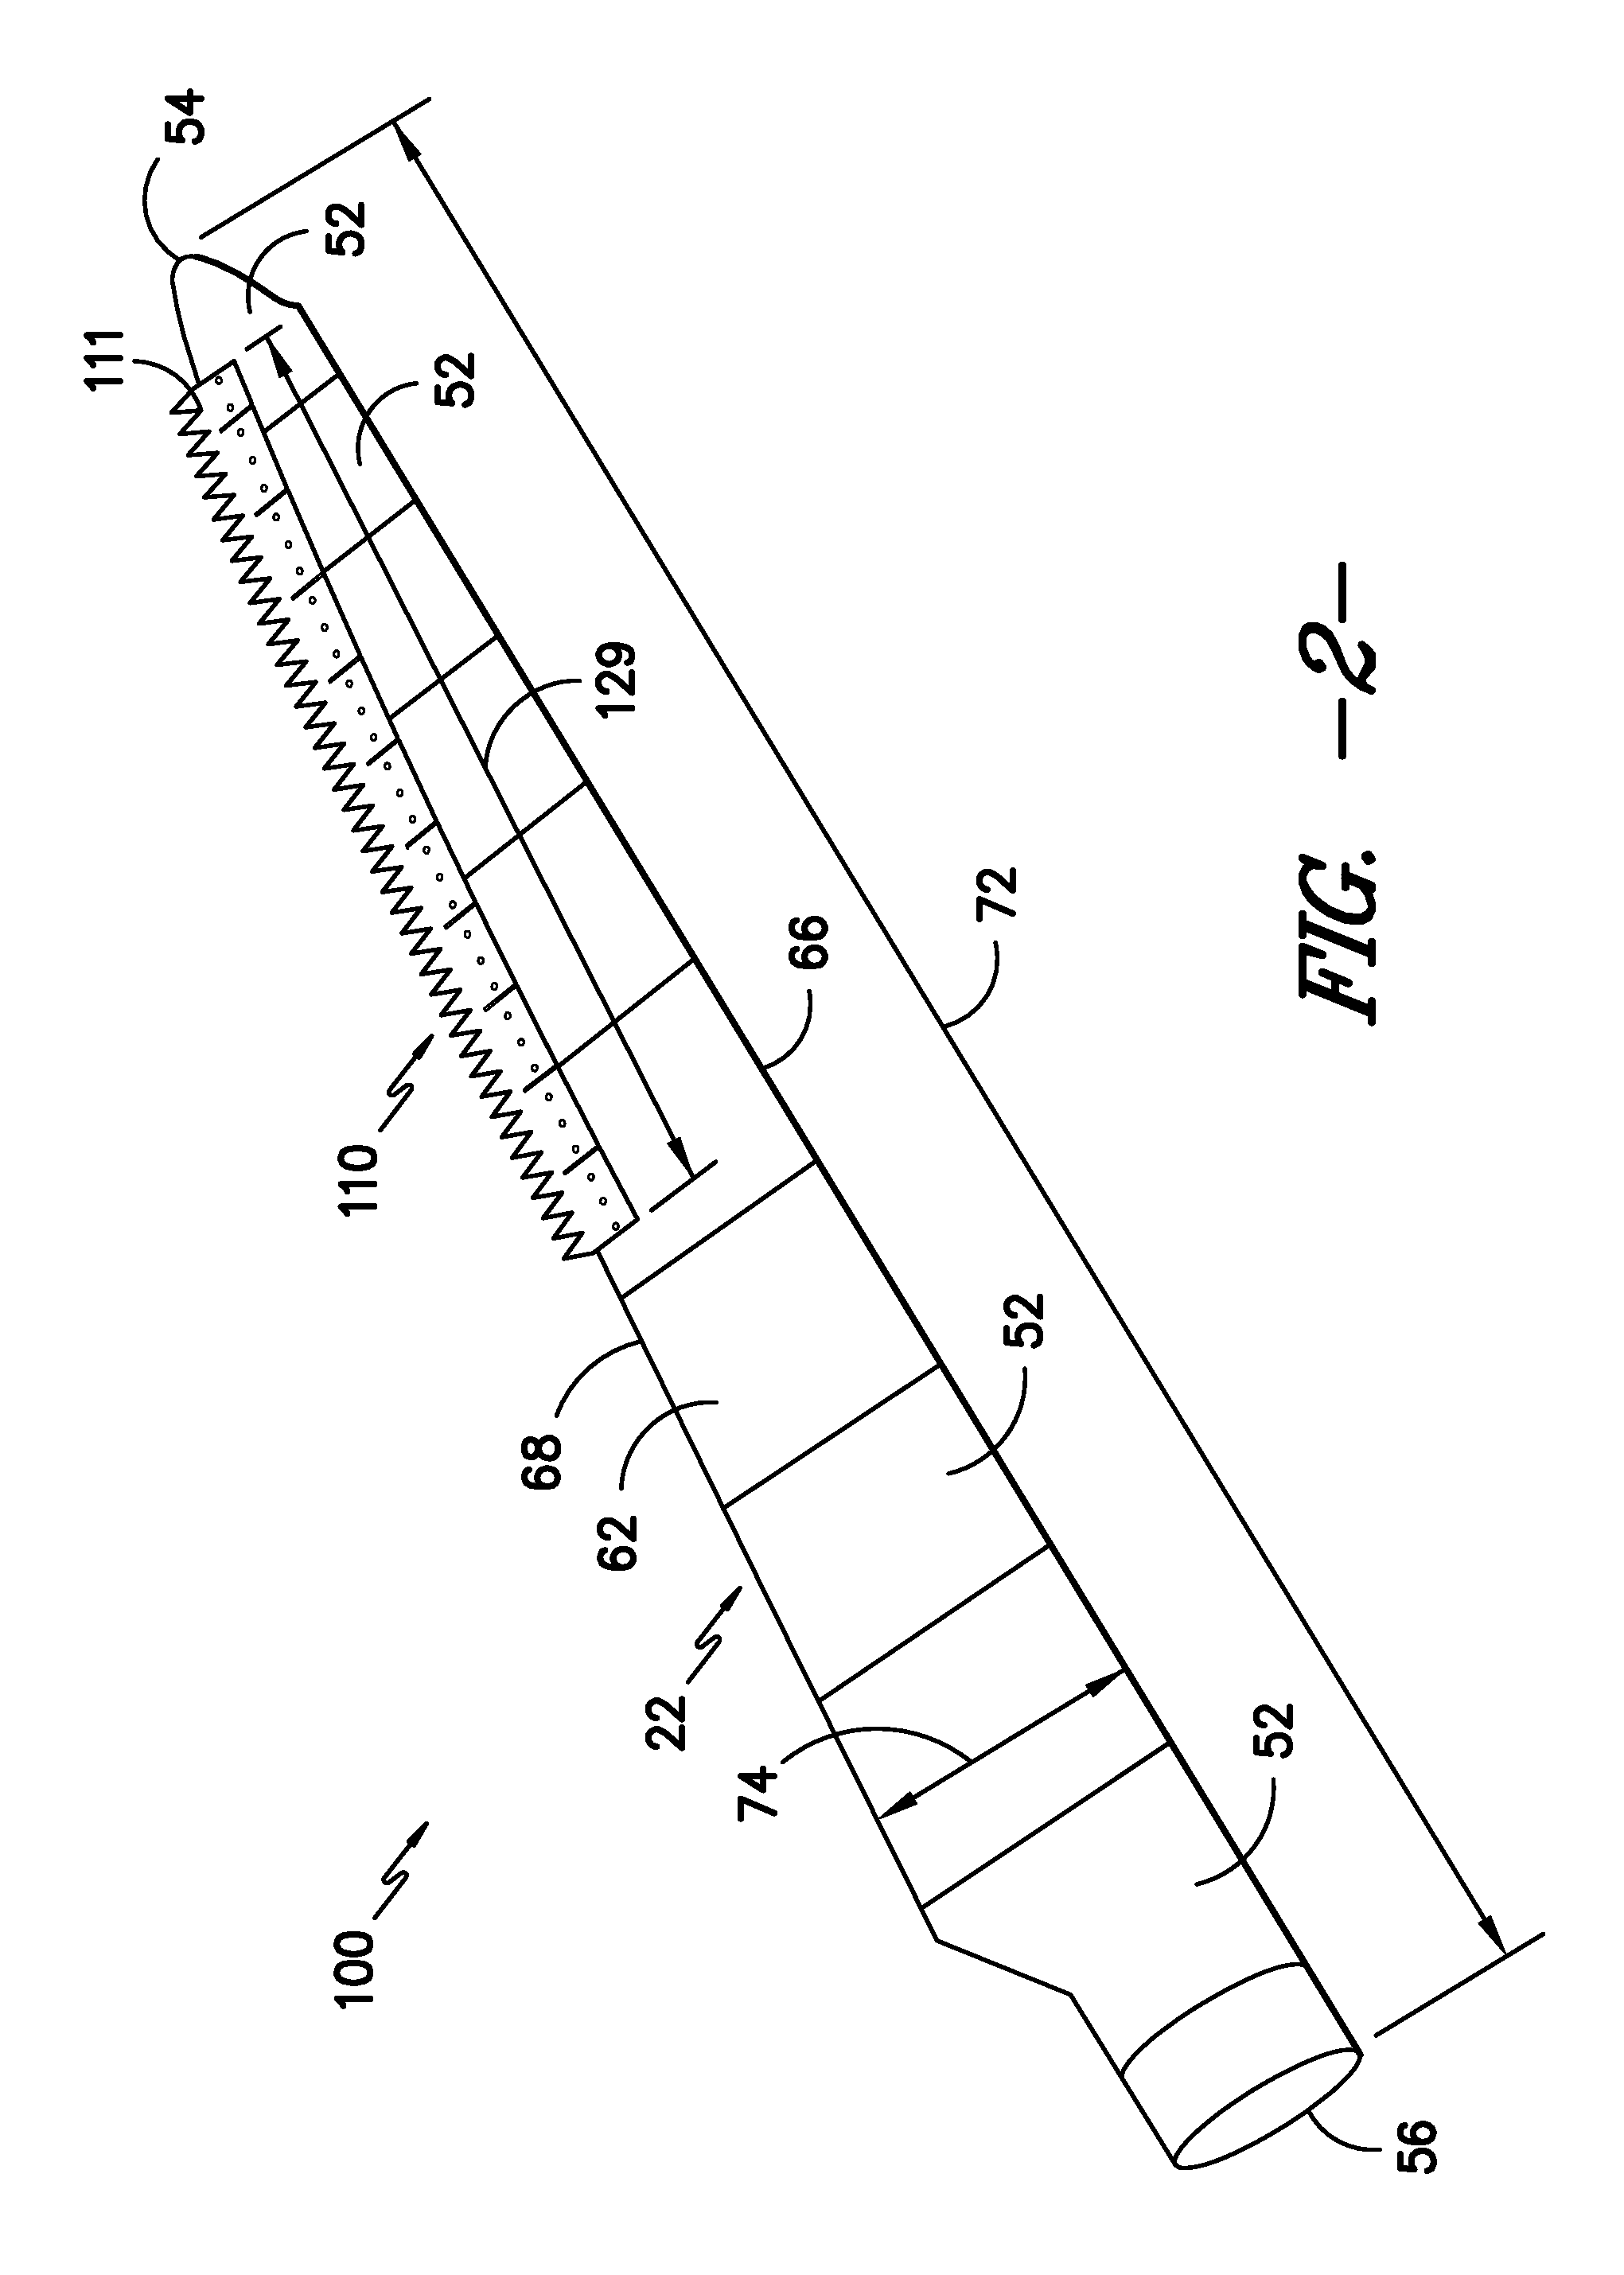 Blade extension for rotor blade in wind turbine